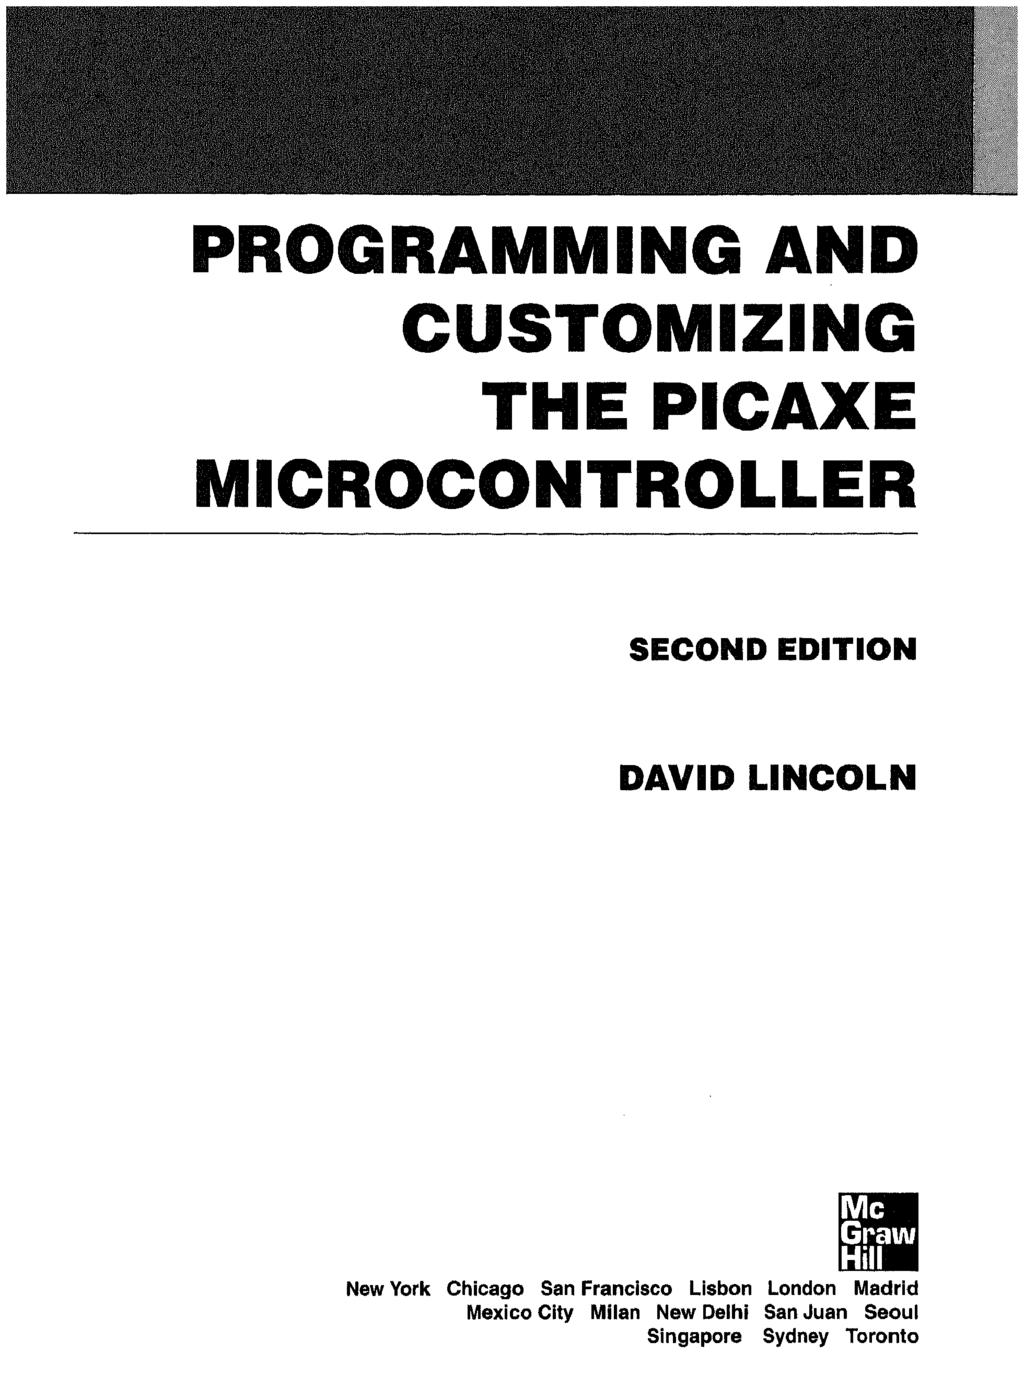 PROGRAMMING AND CUSTOMIZING THE PICAXE MICROCONTROLLER SECOND EDITION DAVID LINCOLN Mc Grauu Hill New York